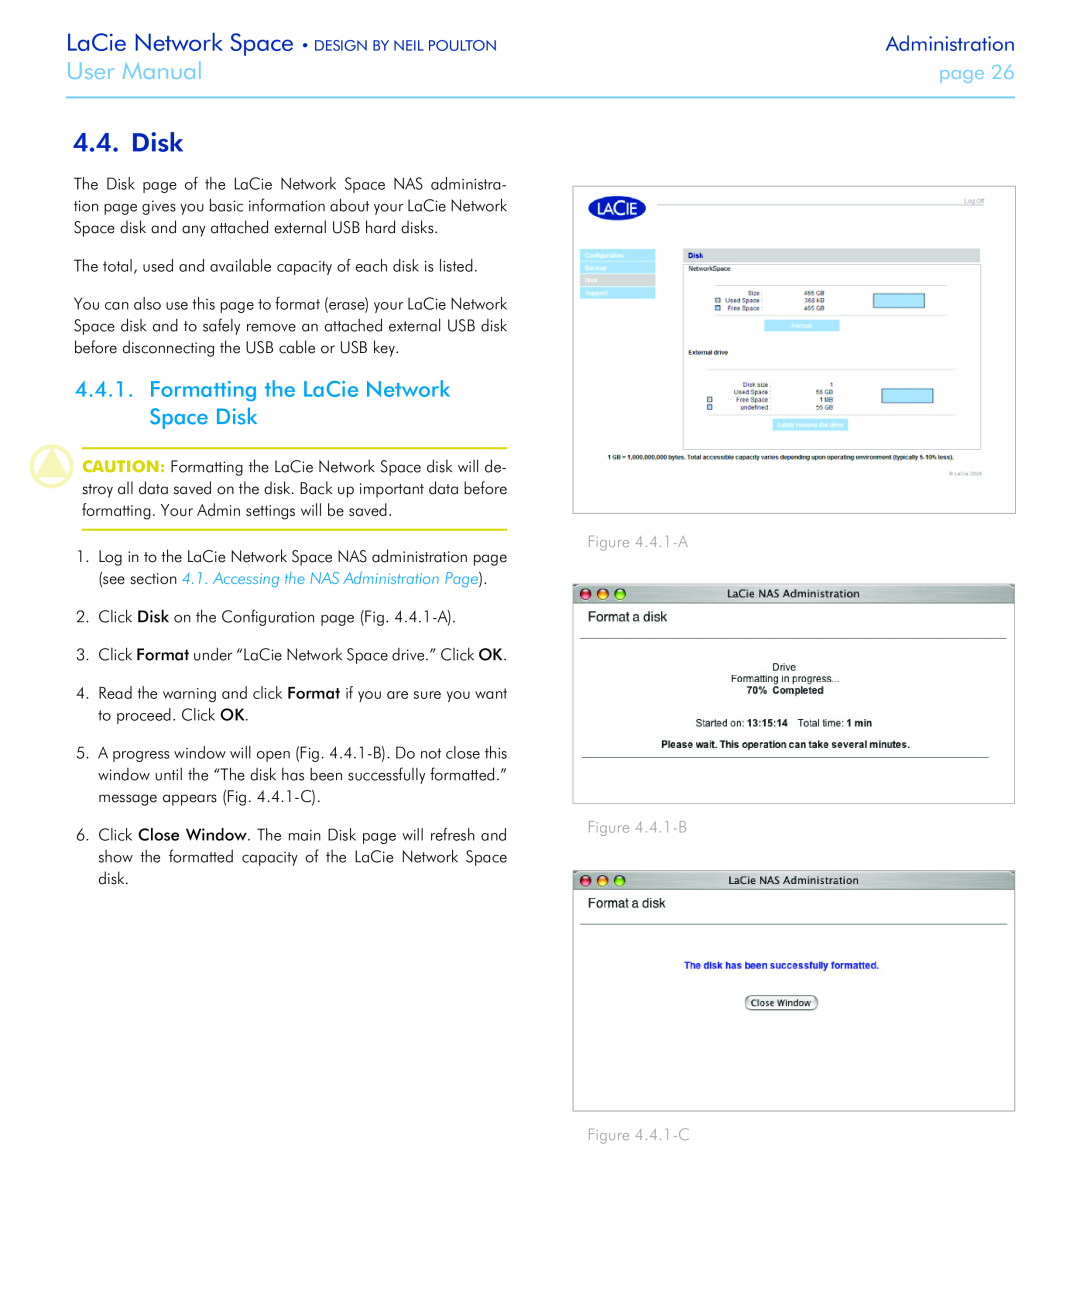 LaCie user manual Formatting the LaCie Network Space Disk, 4.1-A .4.1-B, 4.1-C, User Manual, Administration, page 